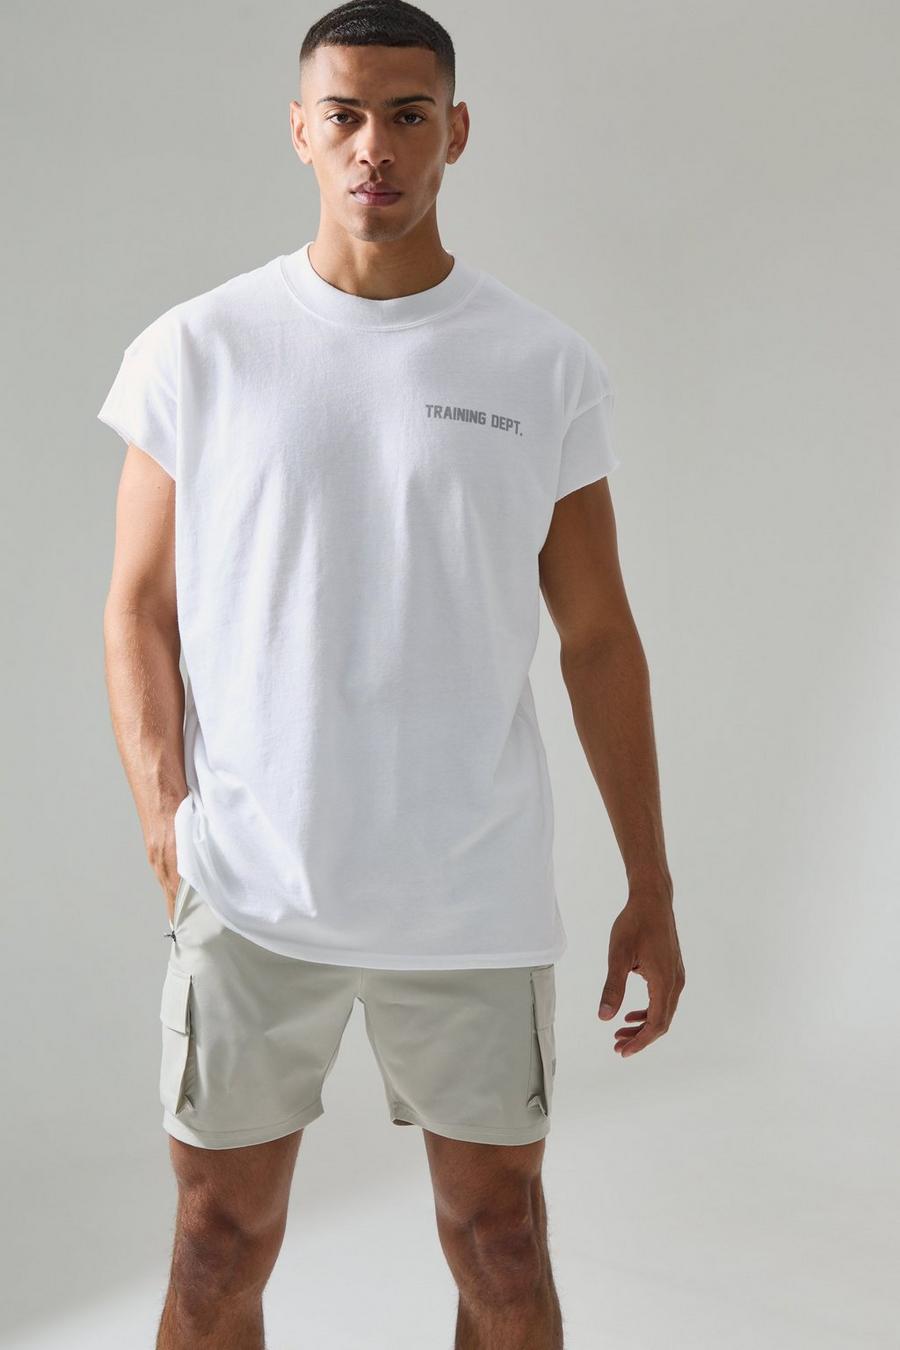 White Active Training Dept Oversized Extended Neck Cut Off T-shirt image number 1